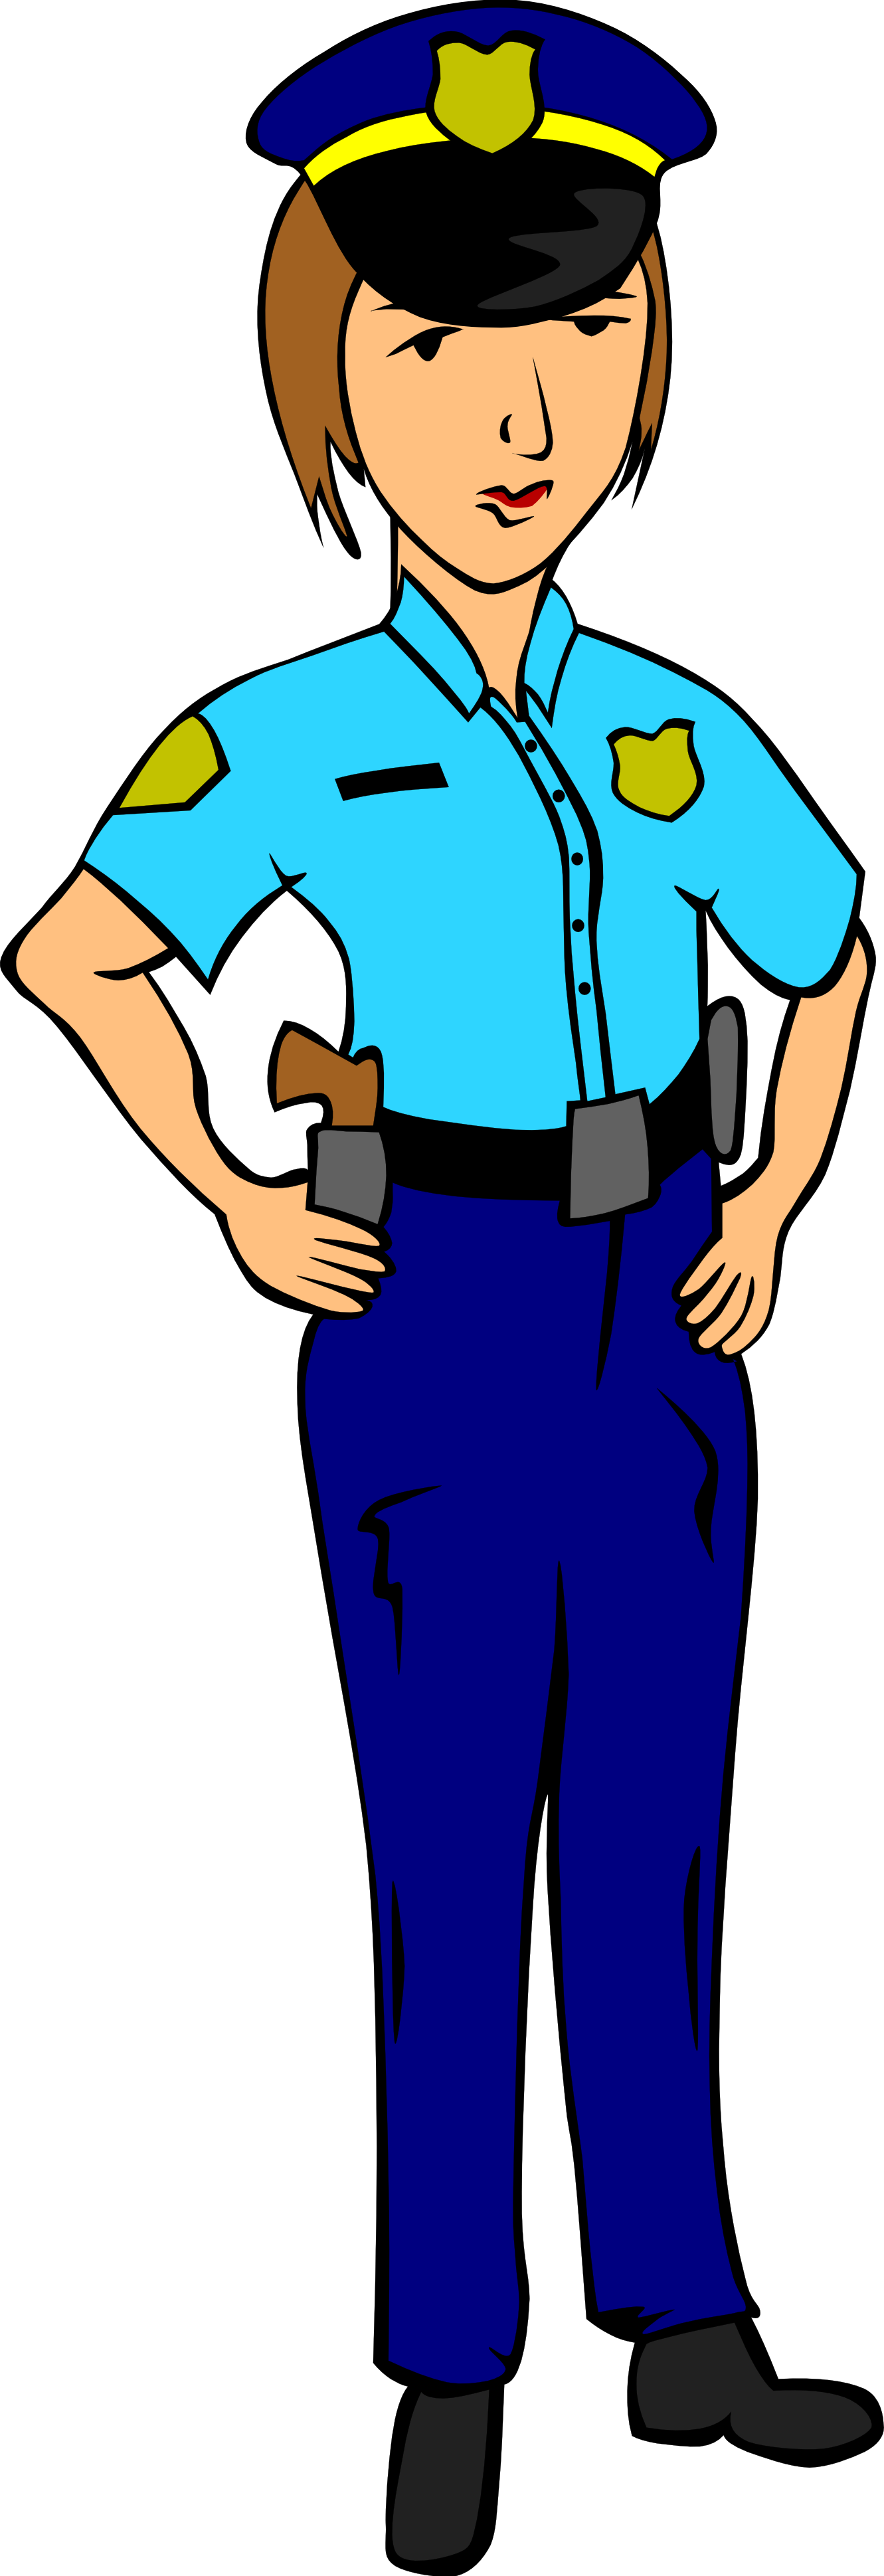 Police officer clipart free download clip art